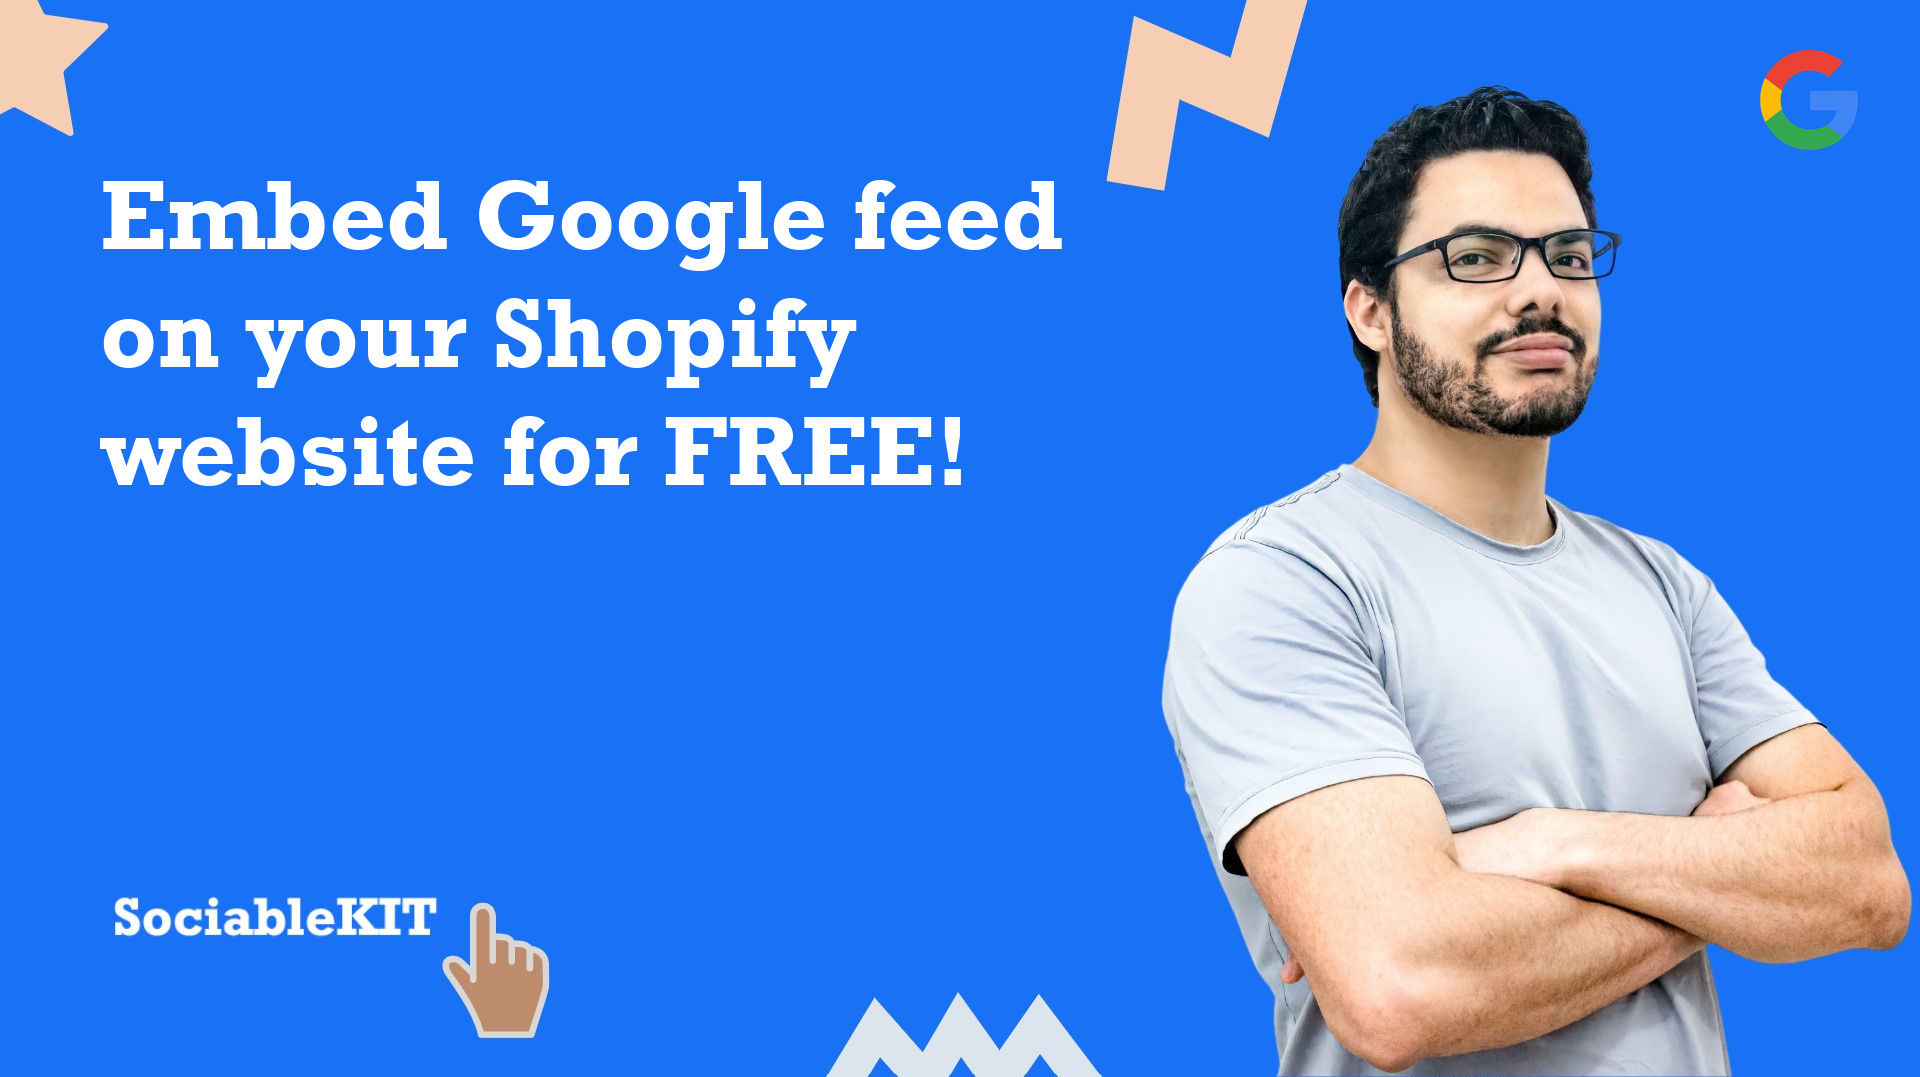 How to embed Google feed on your Shopify website for FREE?